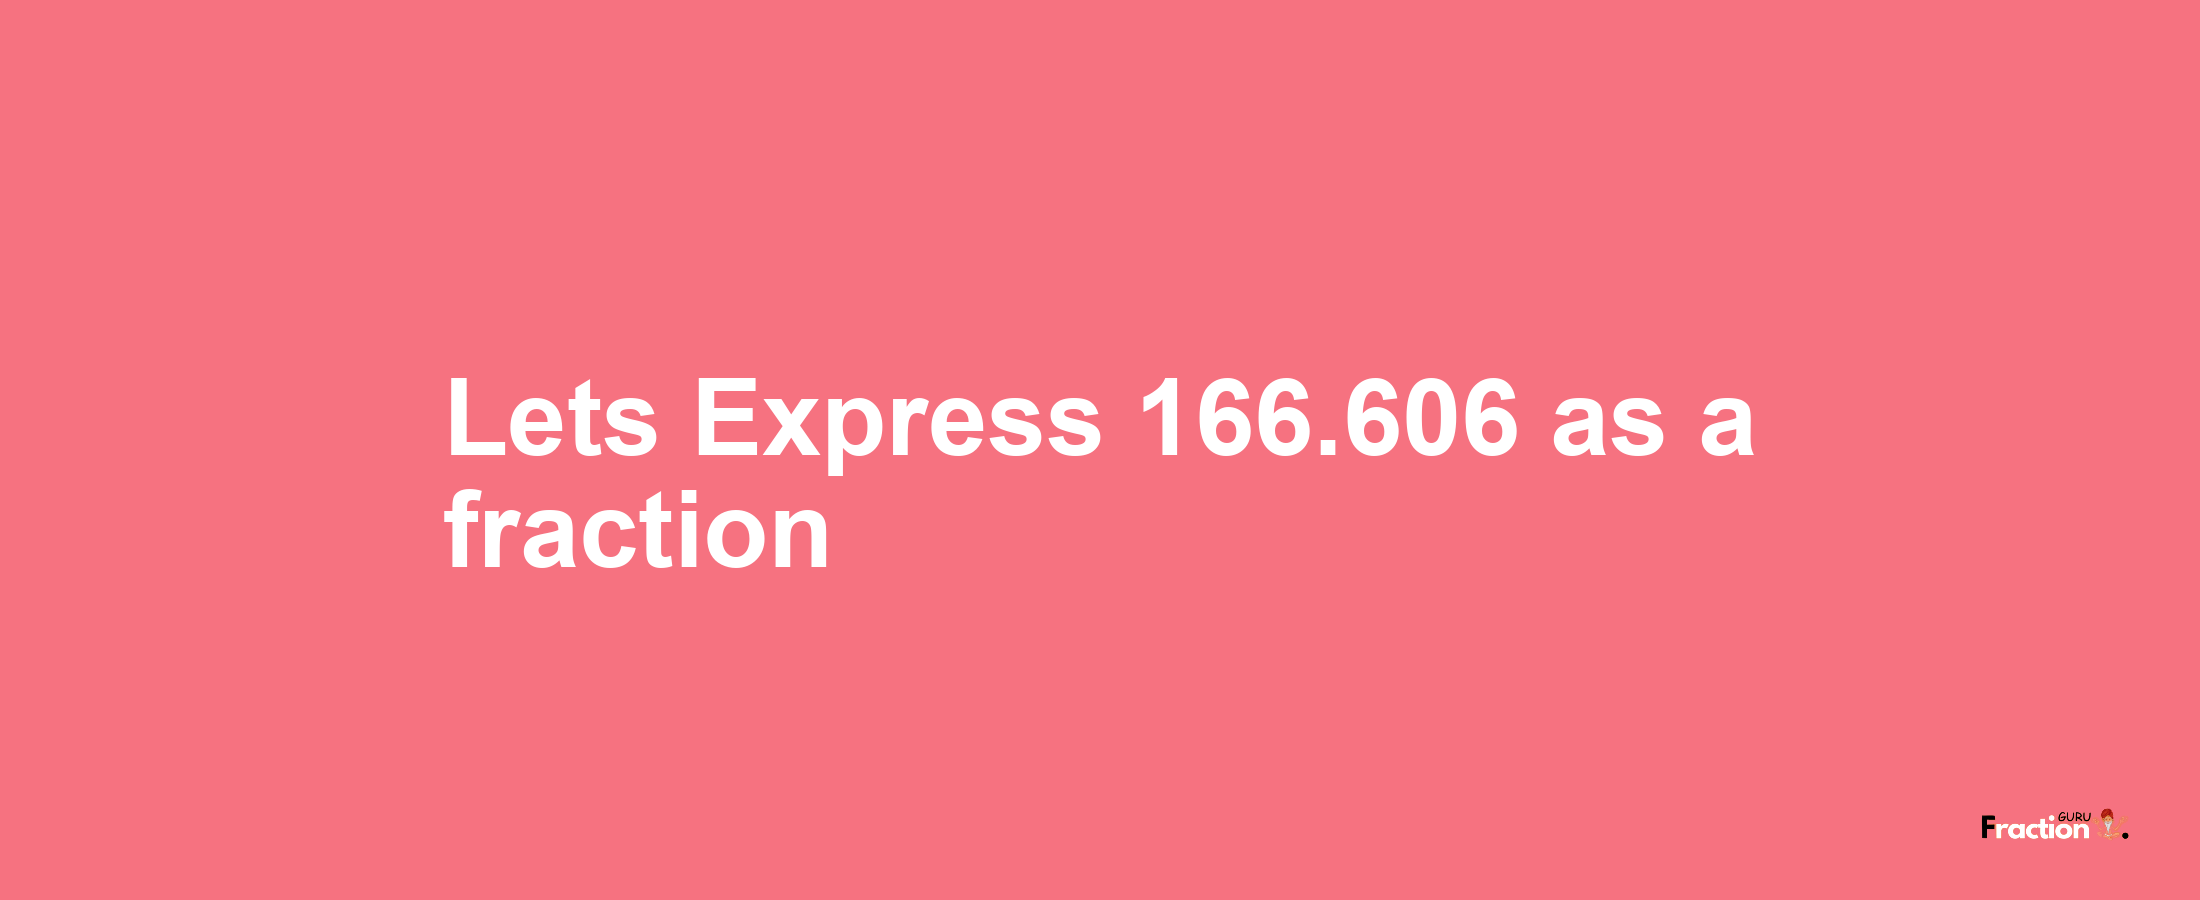 Lets Express 166.606 as afraction